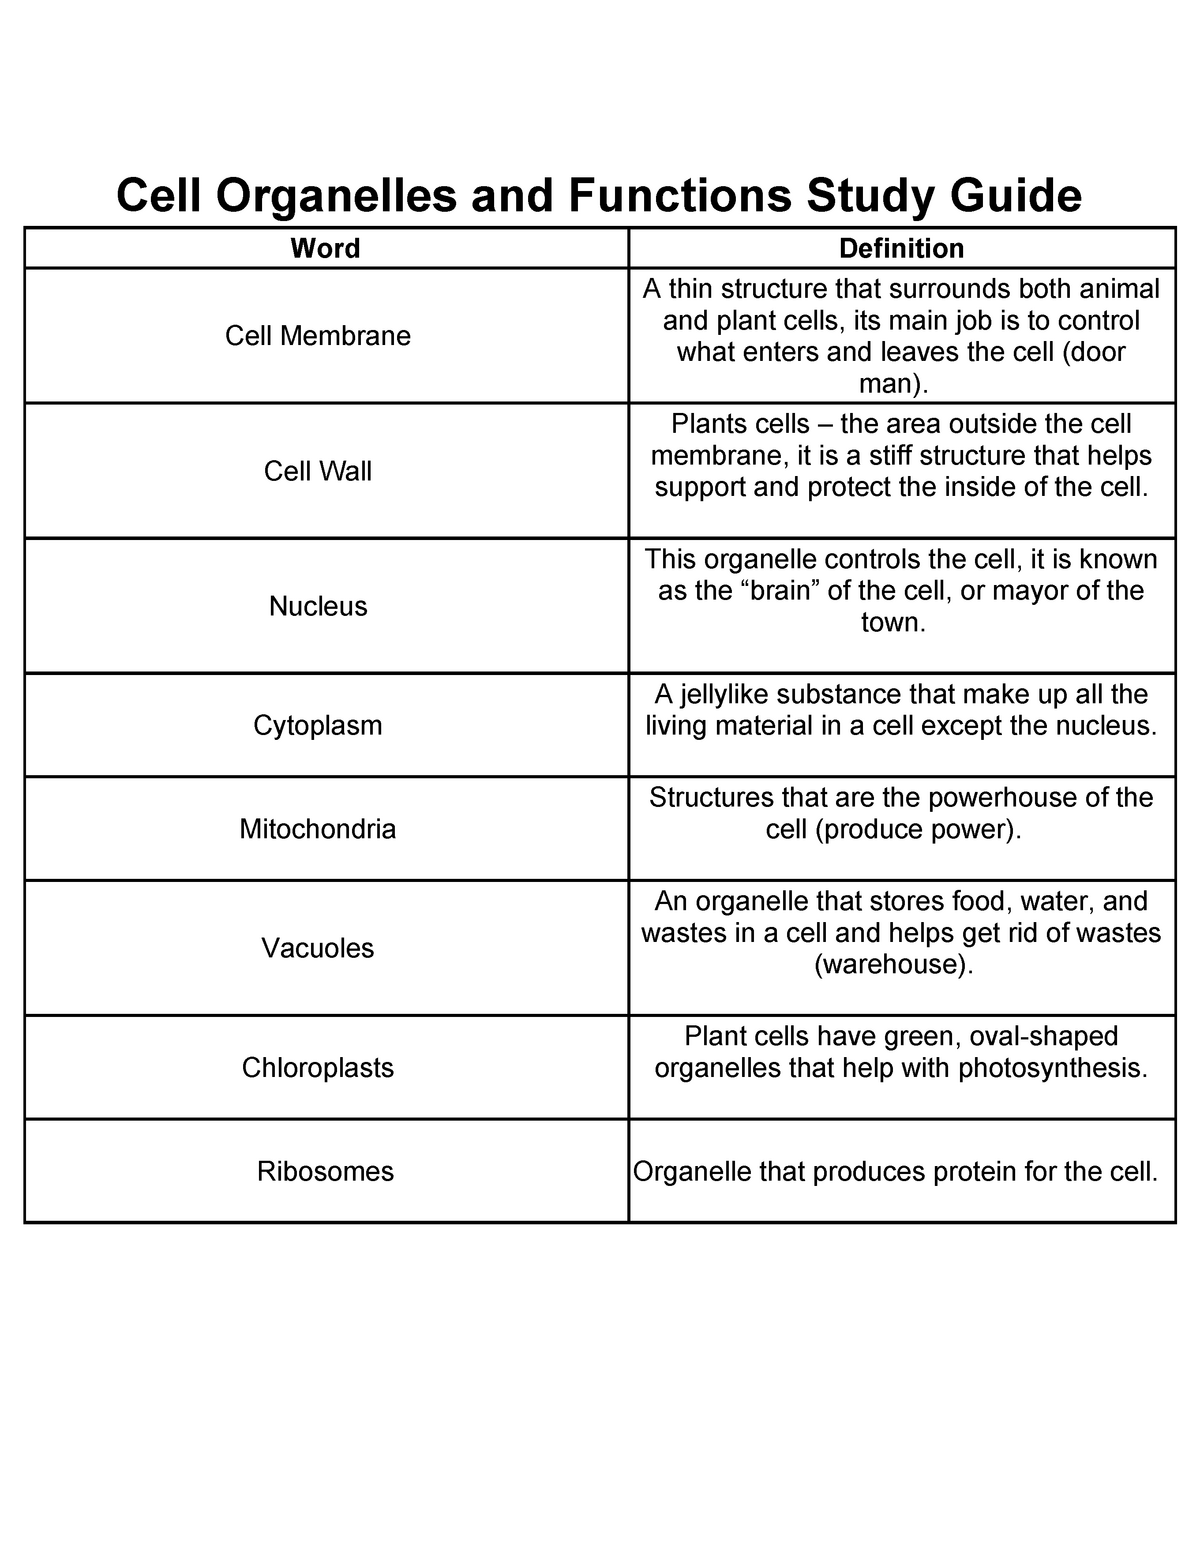 Cell Organelles and Functions Study Guide - Cell Wall Plants cells – the  area outside the cell - Studocu